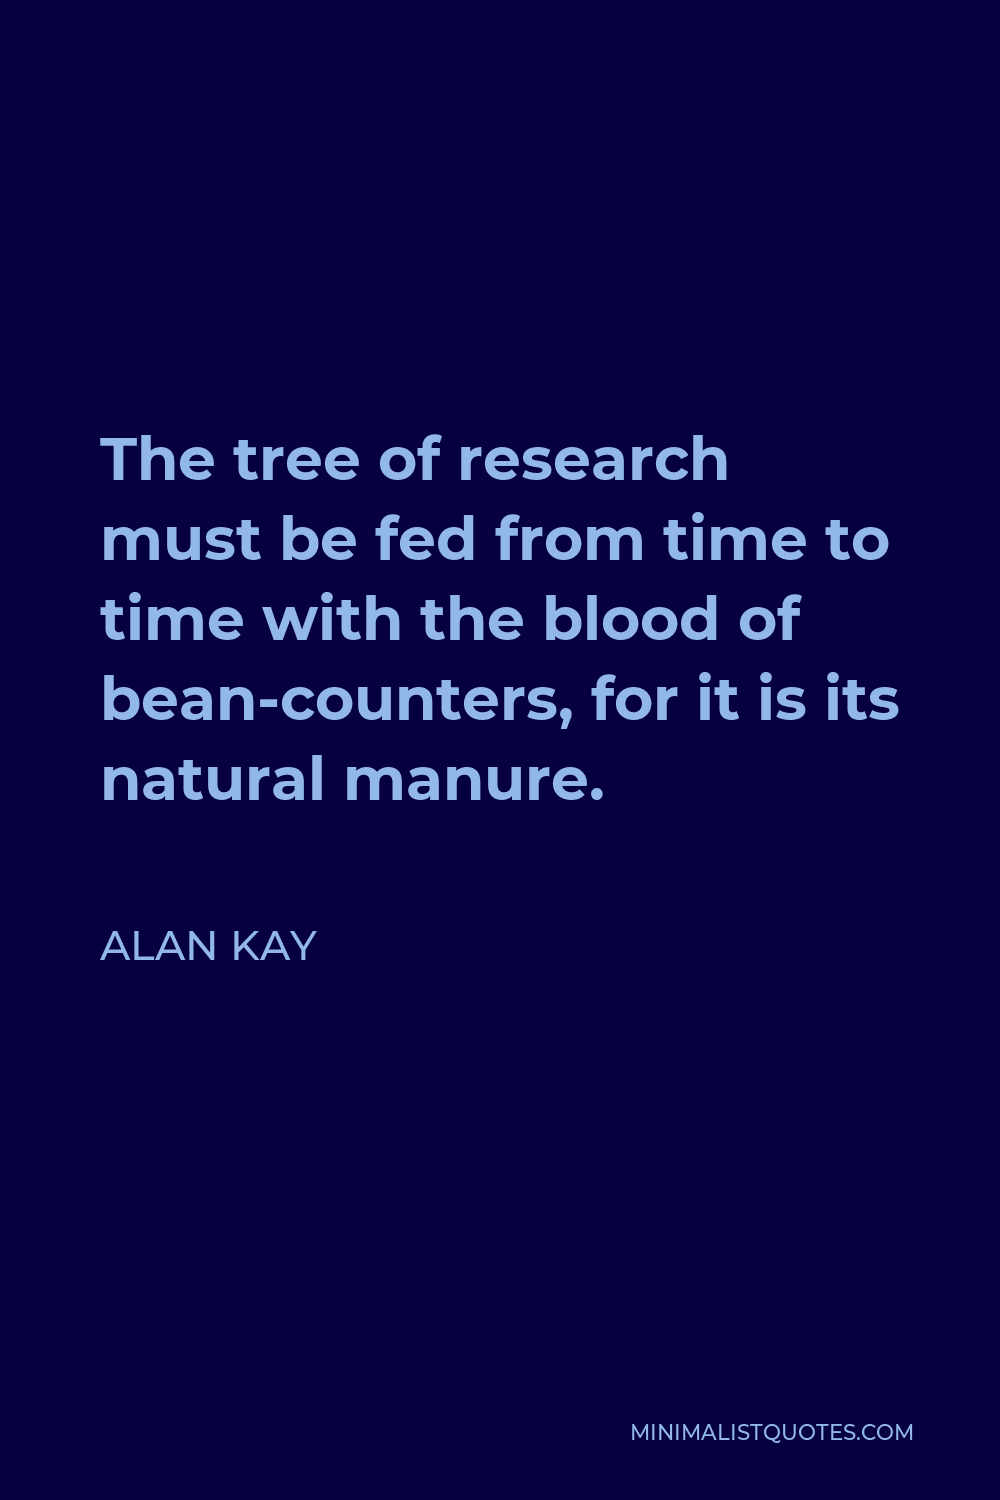 Alan Kay Quote - The tree of research must be fed from time to time with the blood of bean-counters, for it is its natural manure.